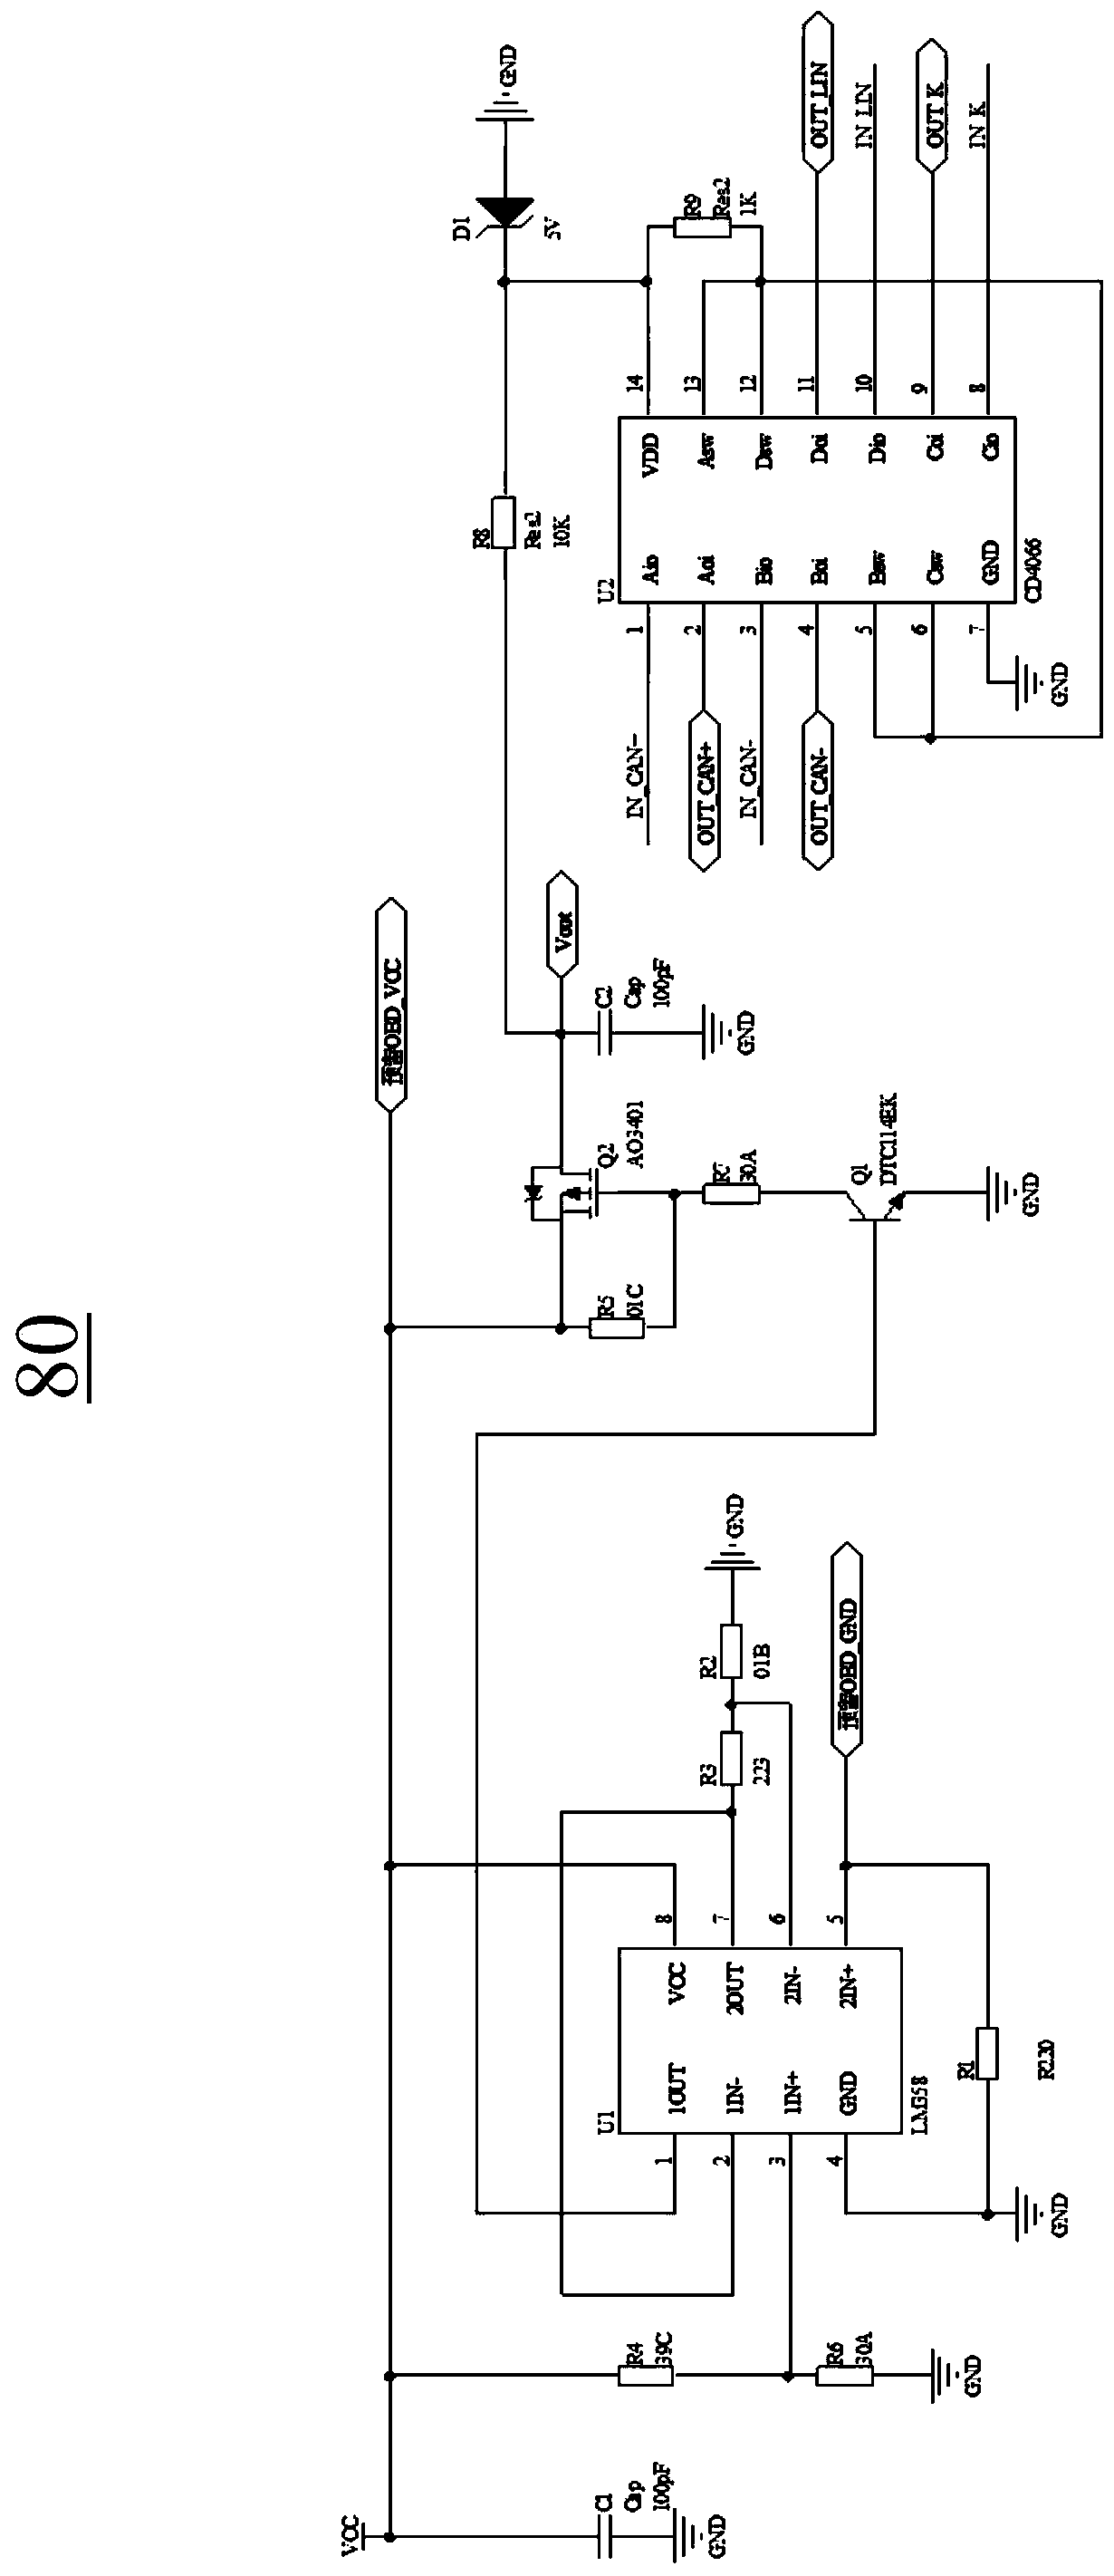 Device and method for automatic switching between multiple access devices based on vehicle obd port